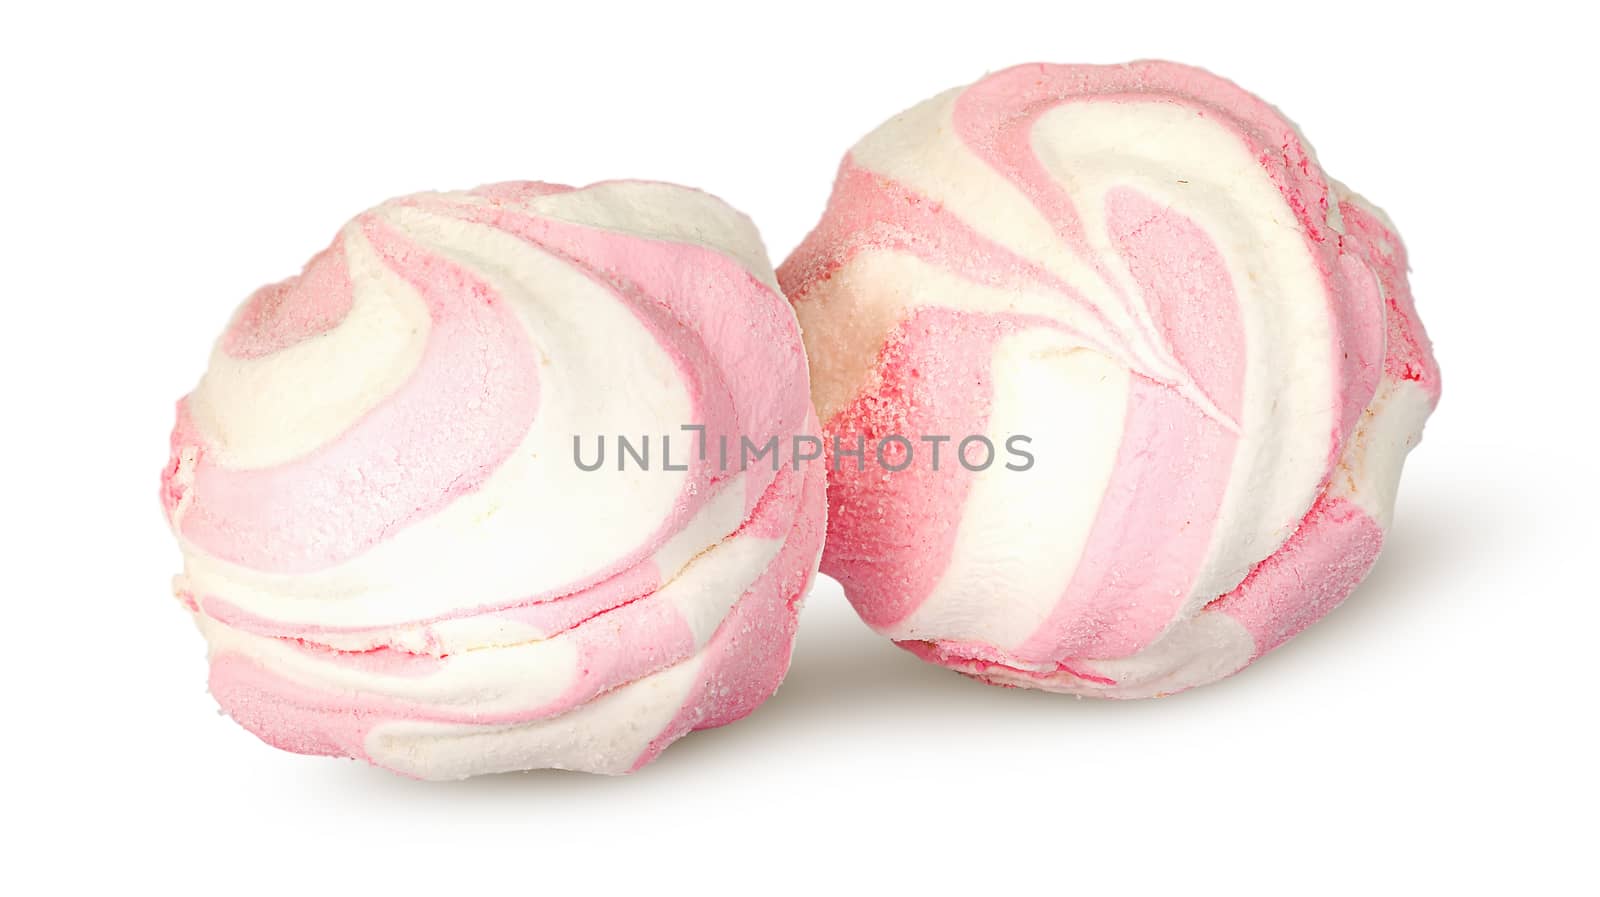 Two white and pink marshmallows each other by Cipariss